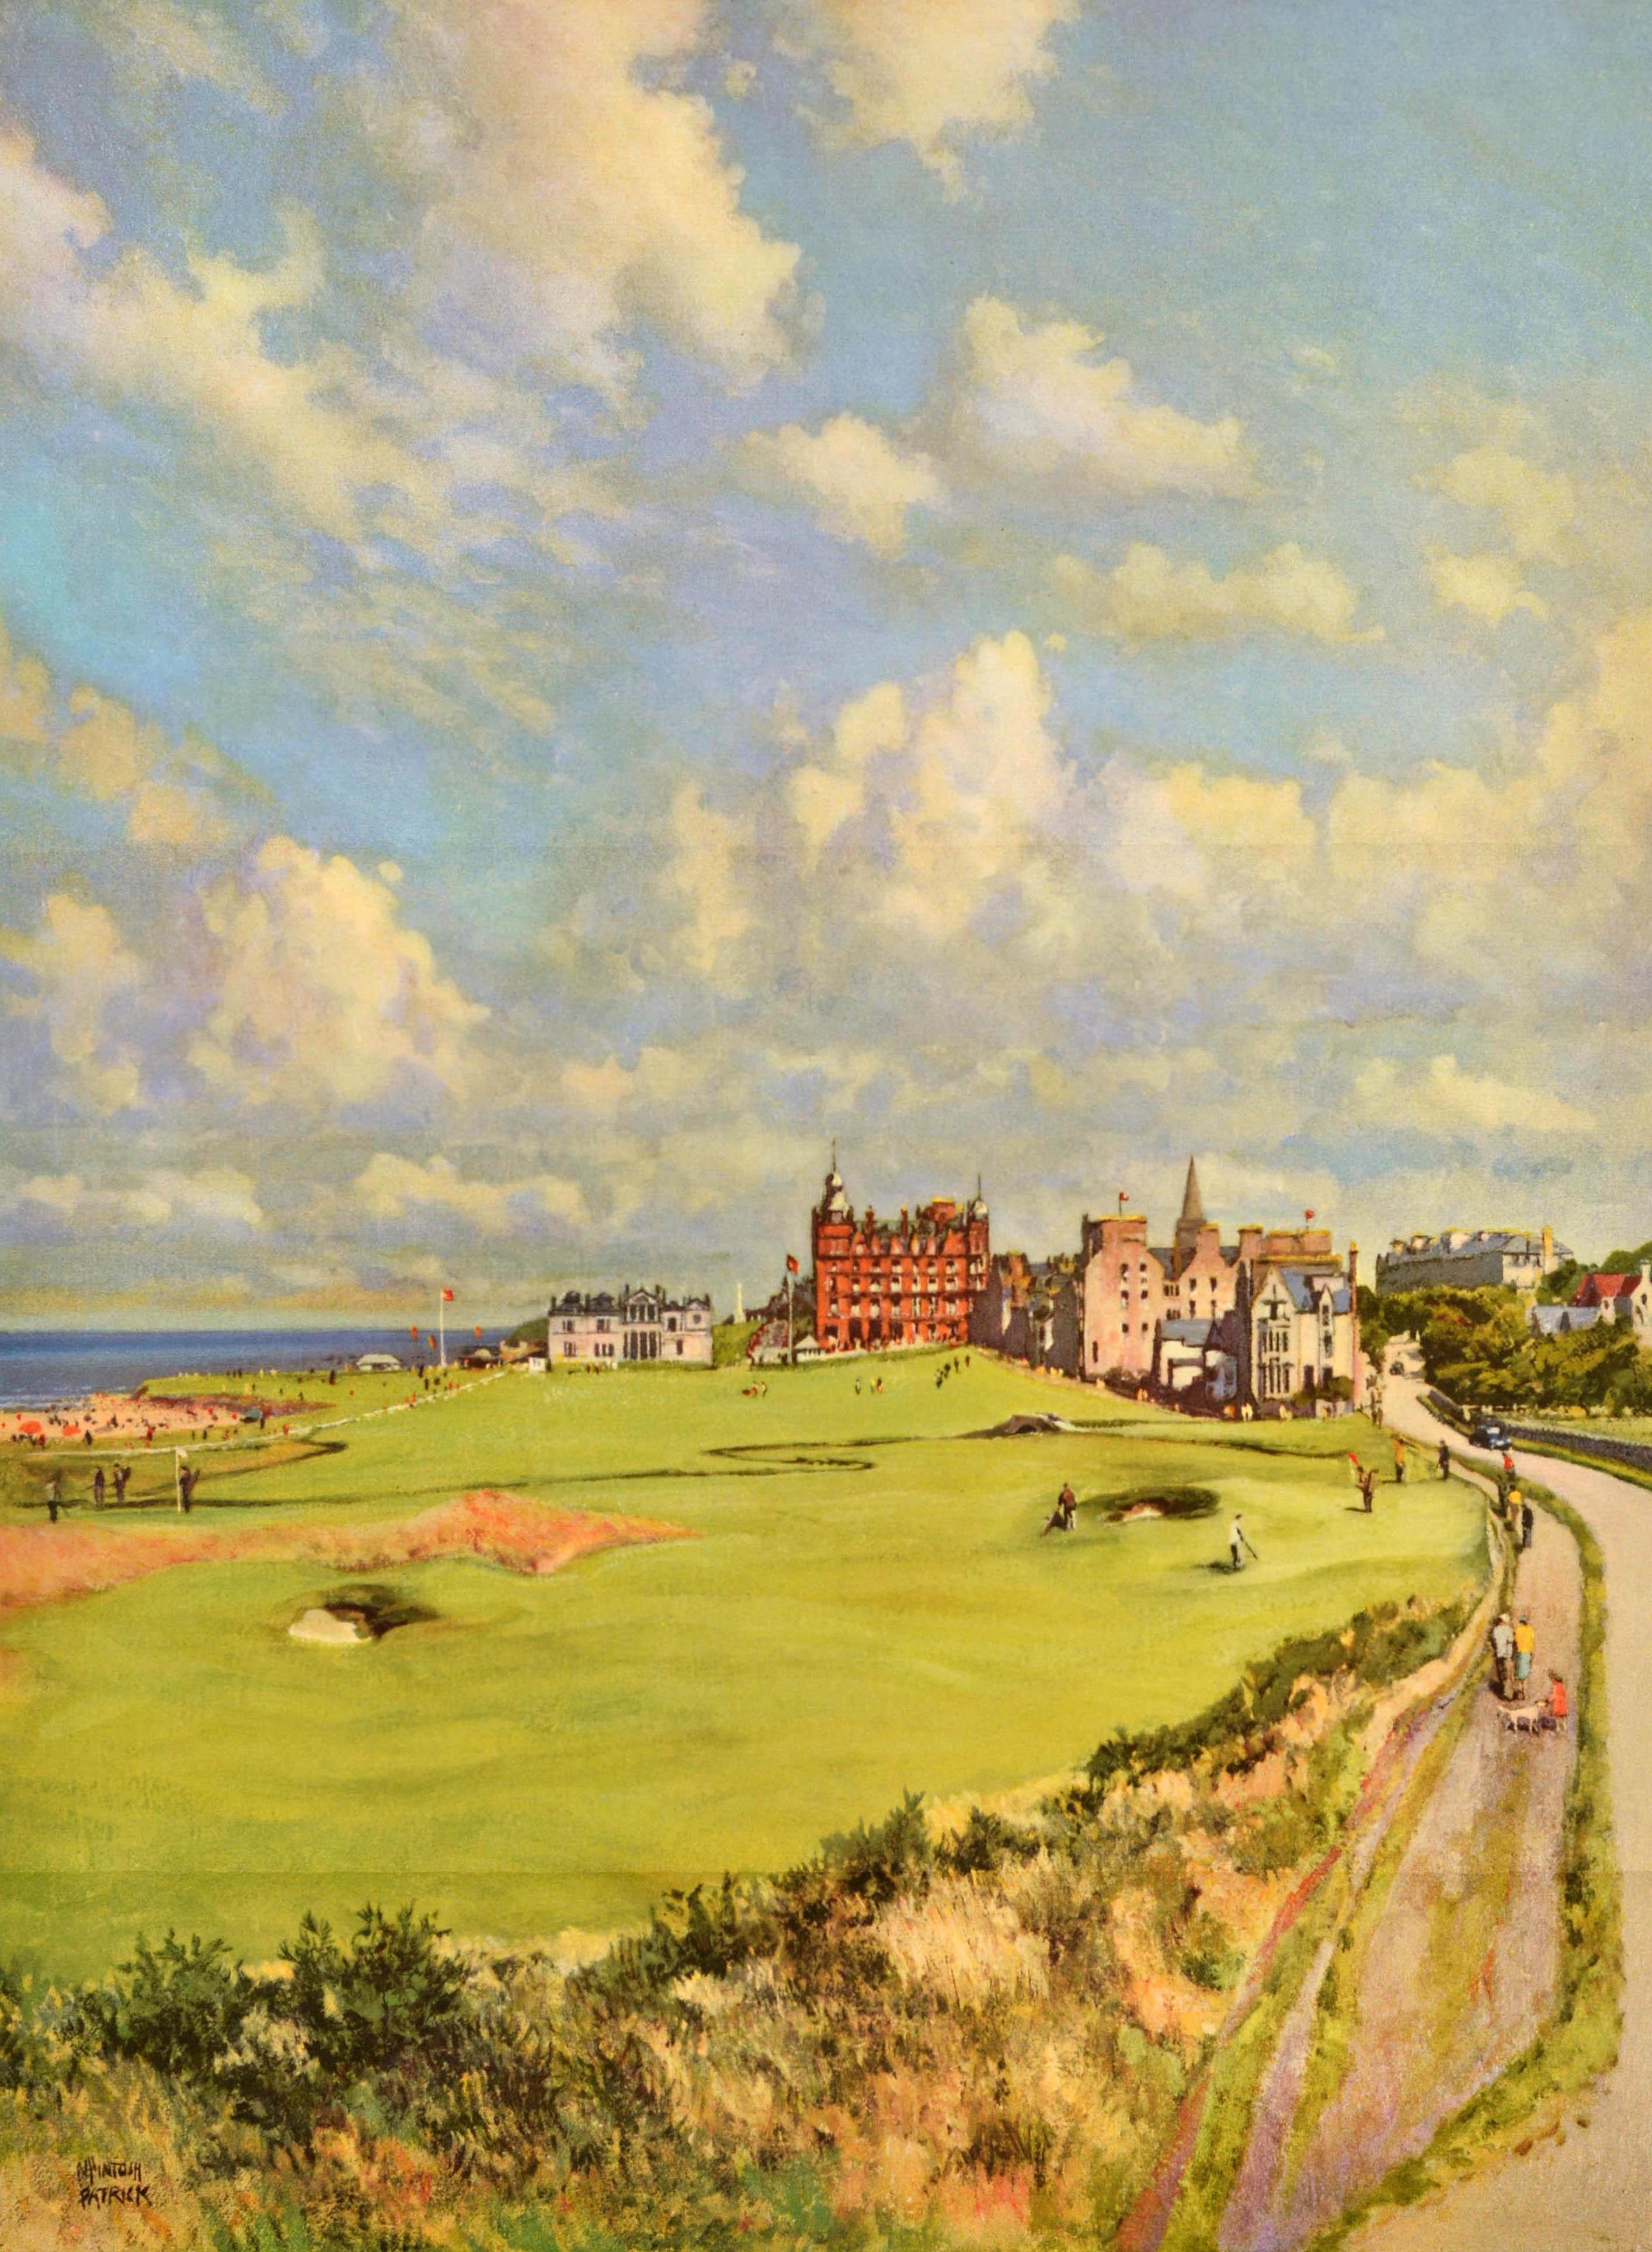 Original vintage British Railways train travel poster for St Andrews featuring a colourful image by James McIntosh Patrick (1907-1998) depicting players on the historic St Andrews golf course in Scotland with people enjoying the beach by the sea and